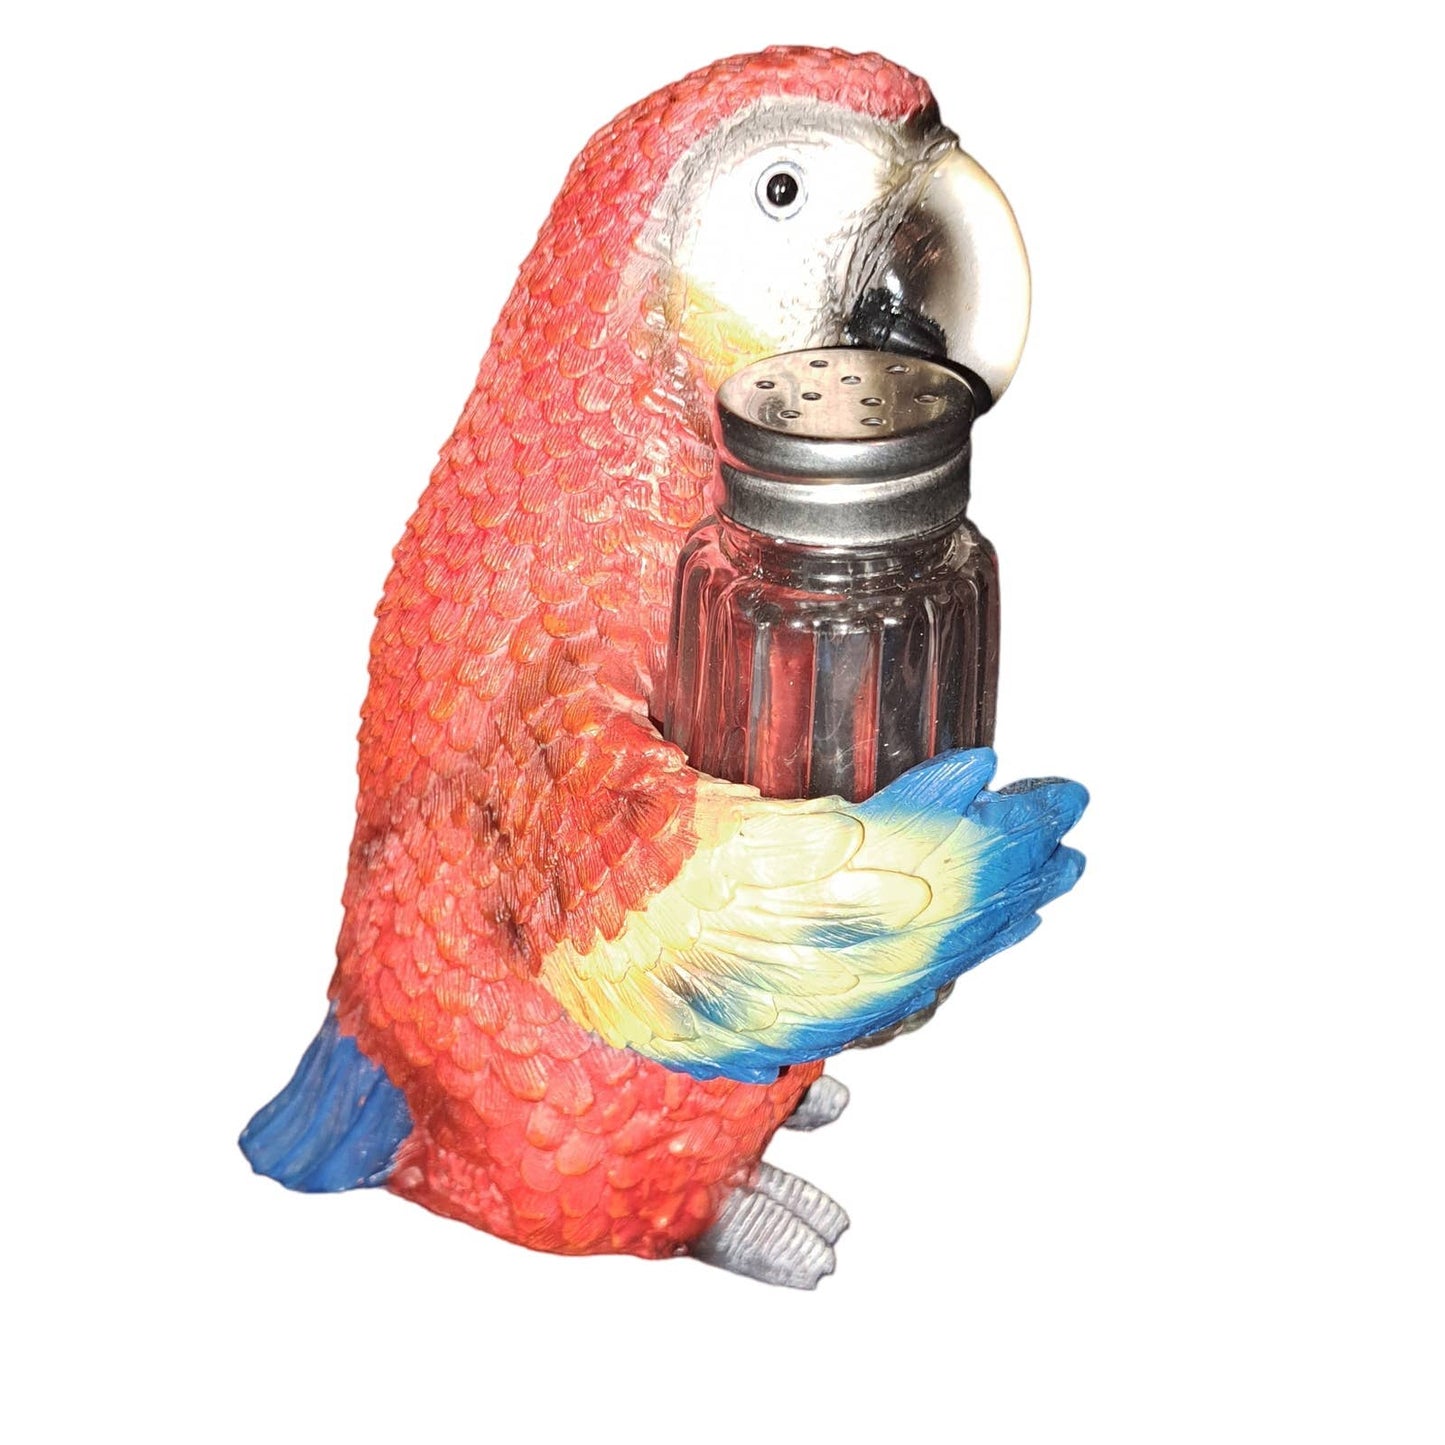 NIB- ADORABLE! Colorful Scarlet Macaw Parrot Salt and Pepper Shaker